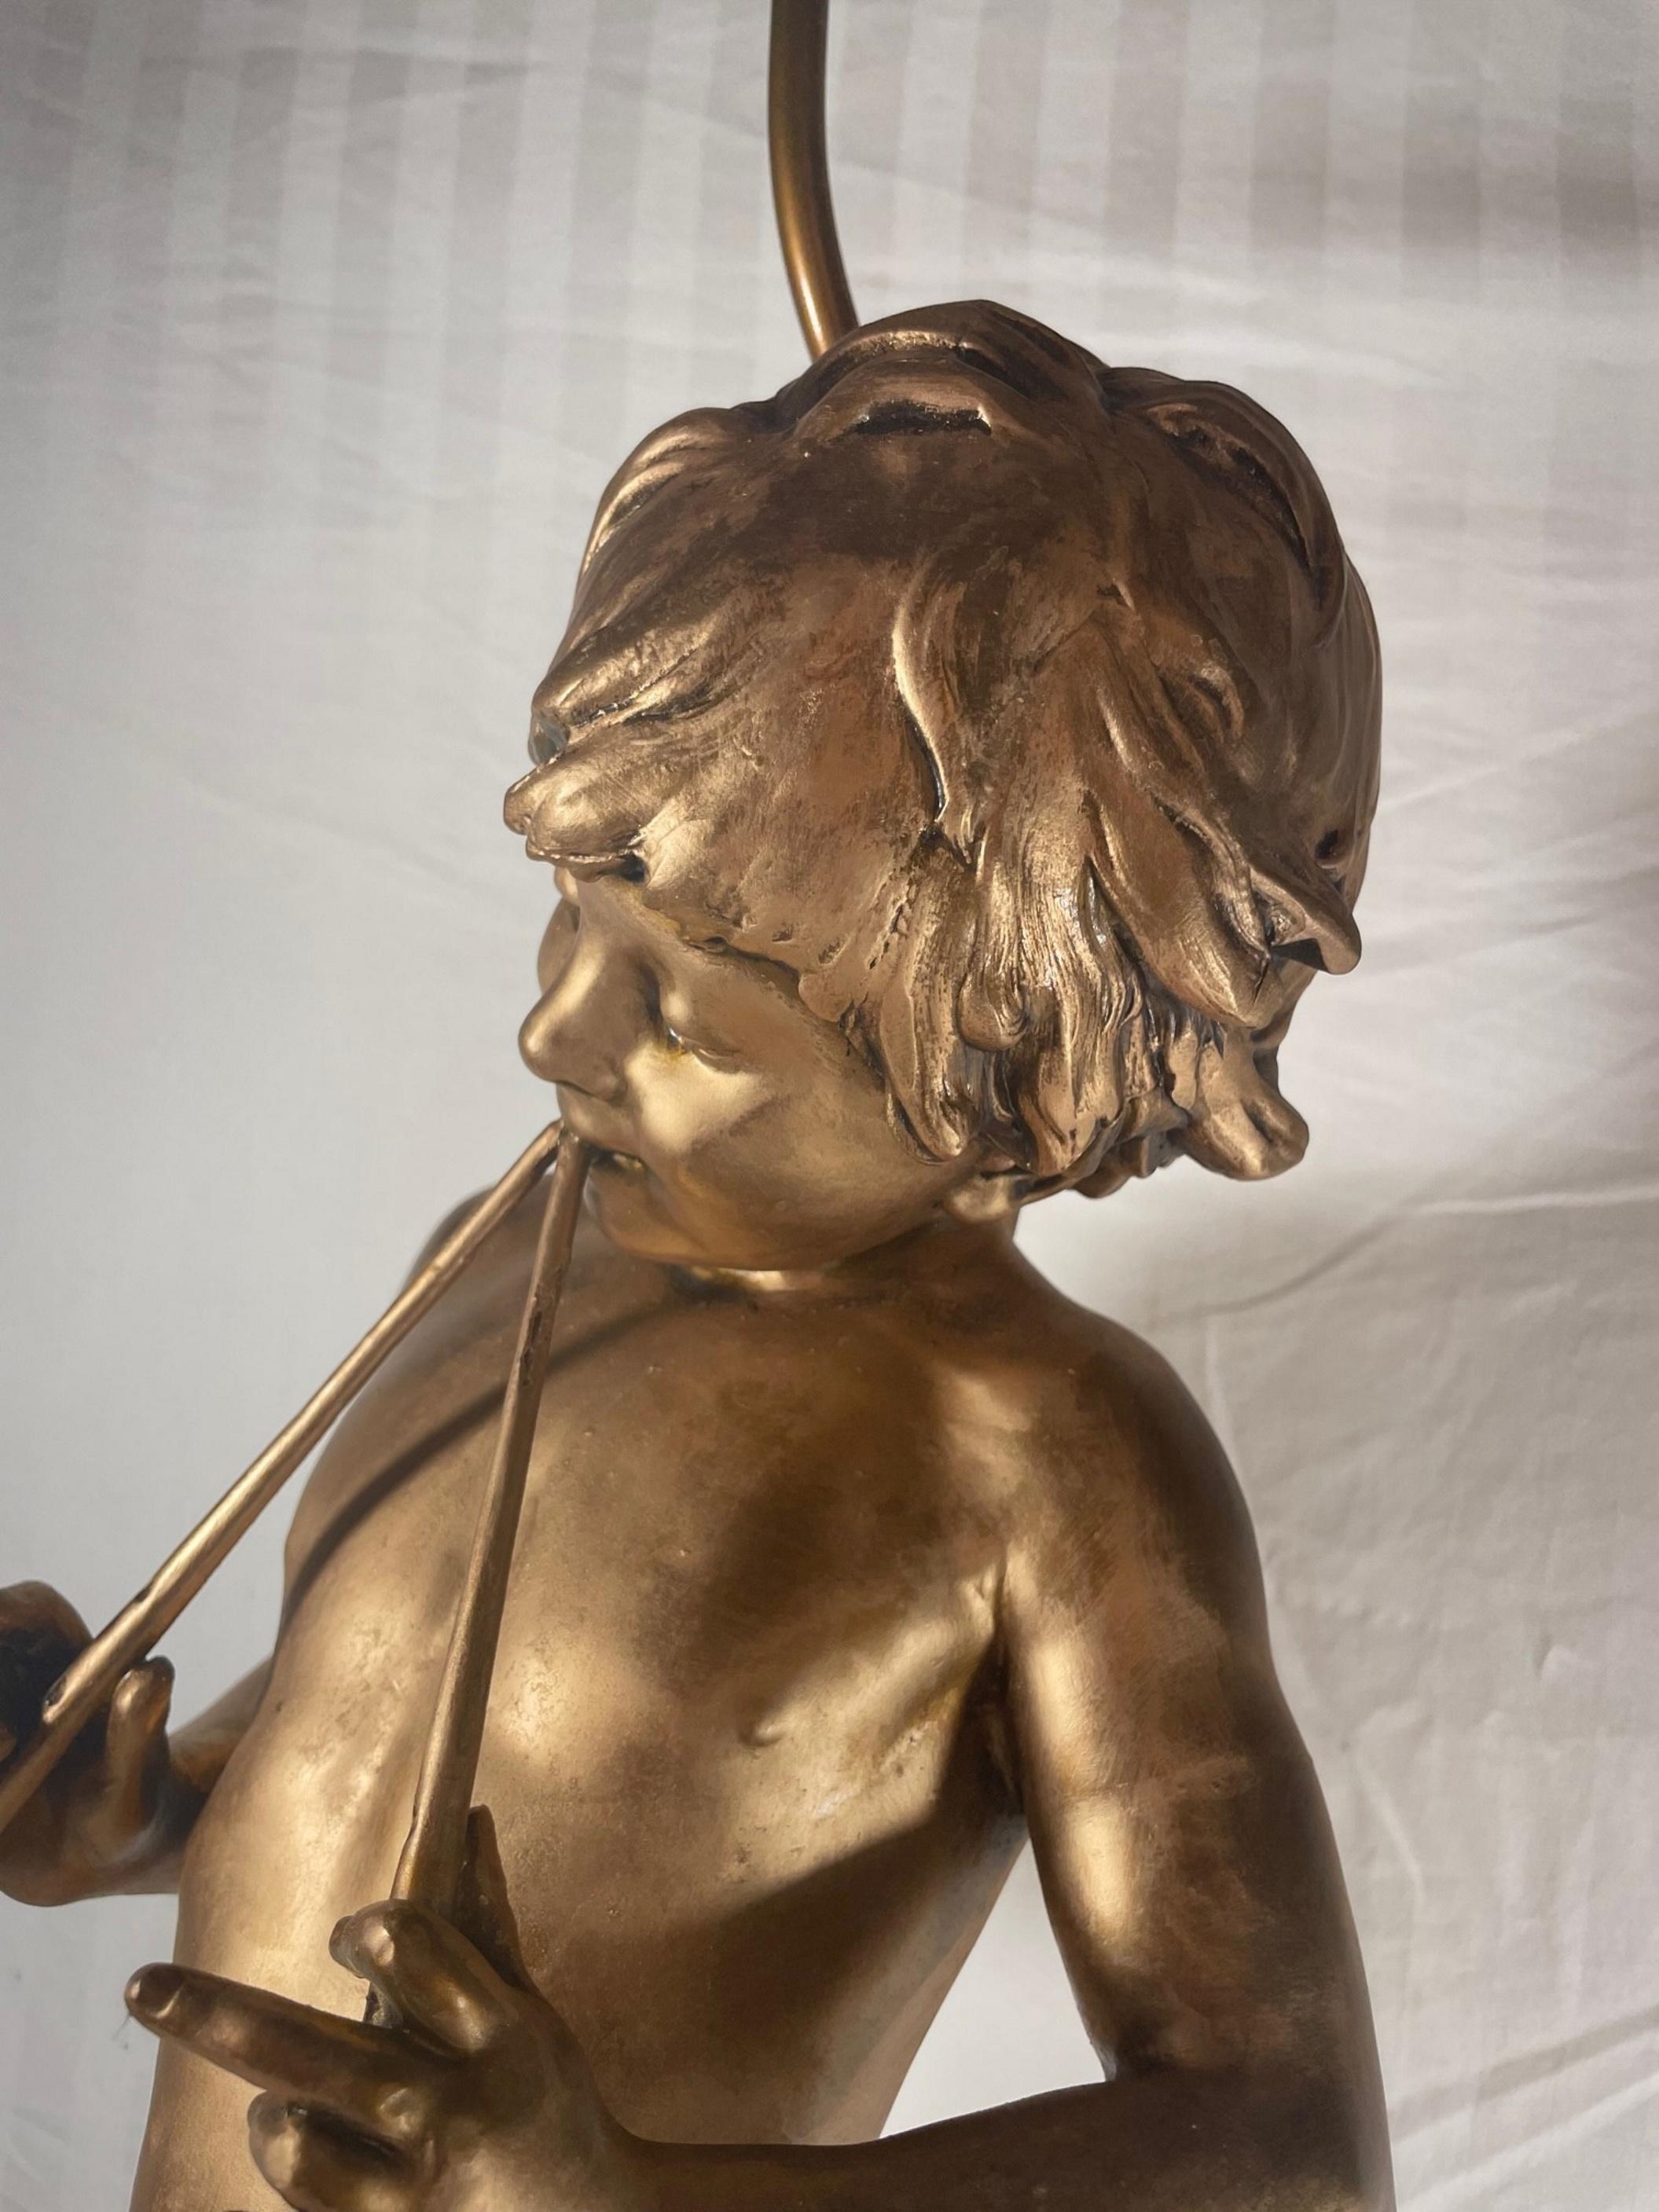 19th Century French Gilt Bronzed Lamp Sculpture “Boy with Flute”, Signed Moreau. For Sale 6